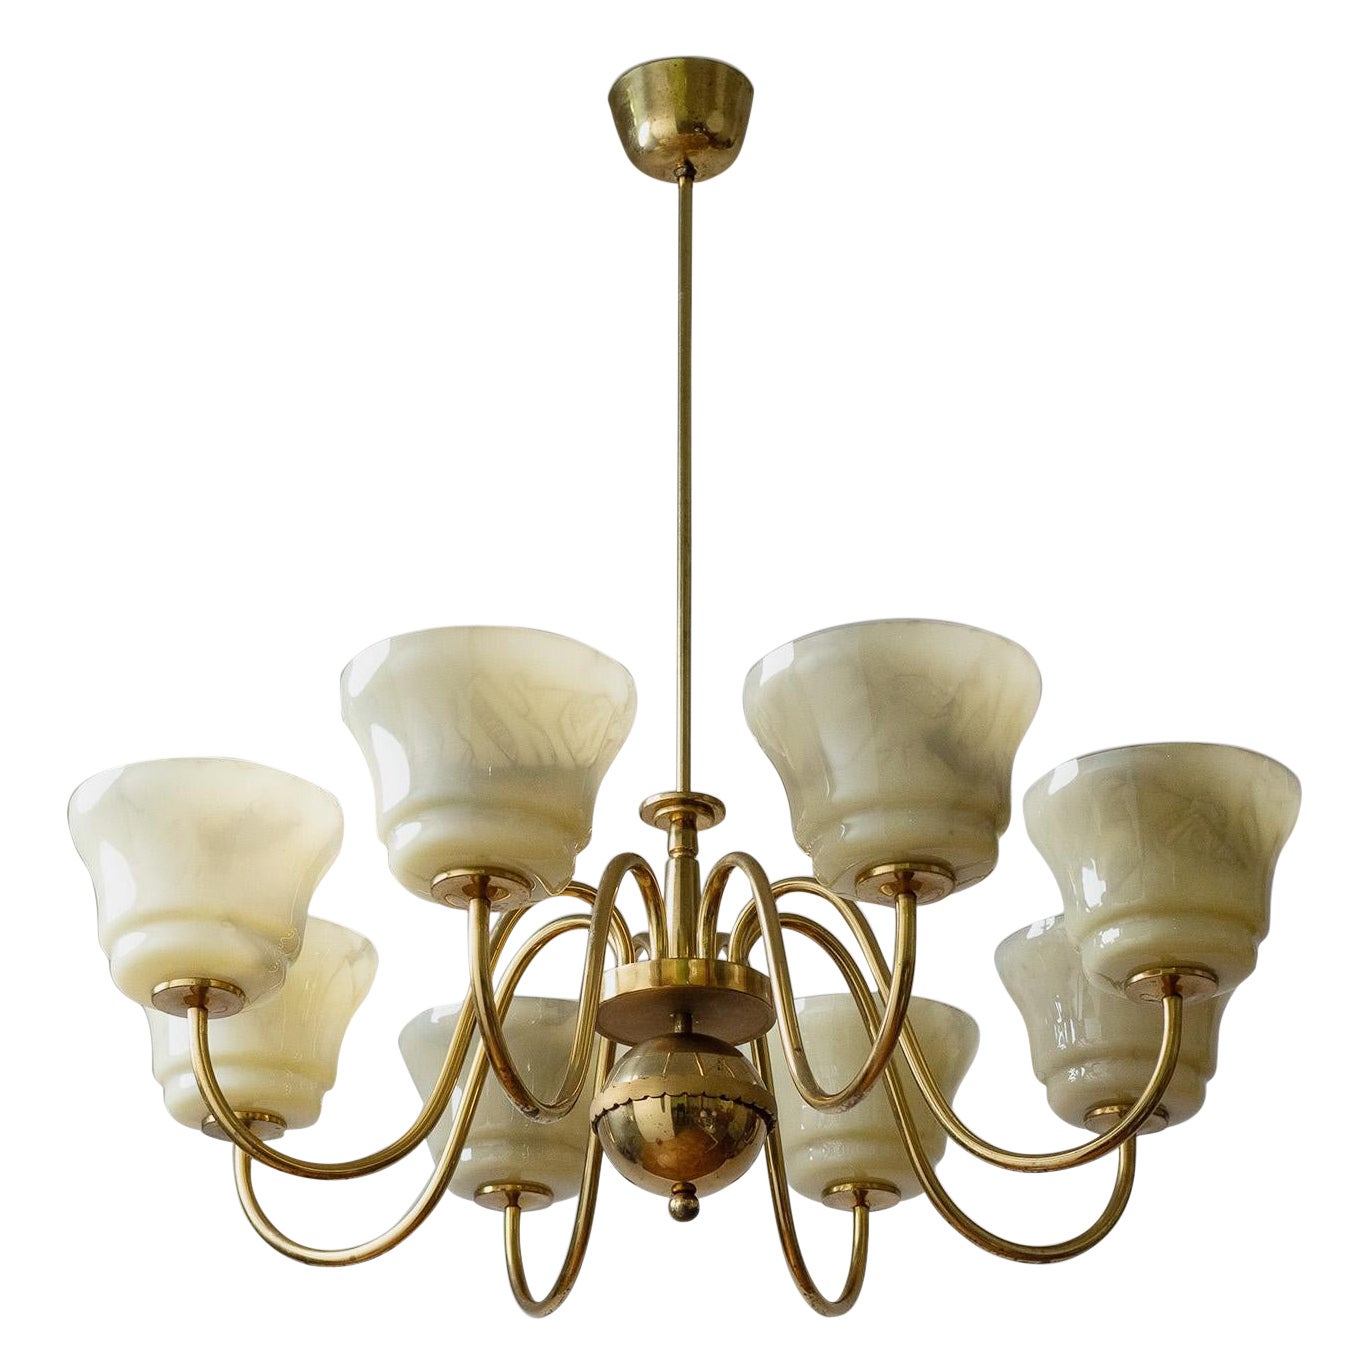 Large Brass Chandelier with Enameled Glass Shades, 1940s For Sale